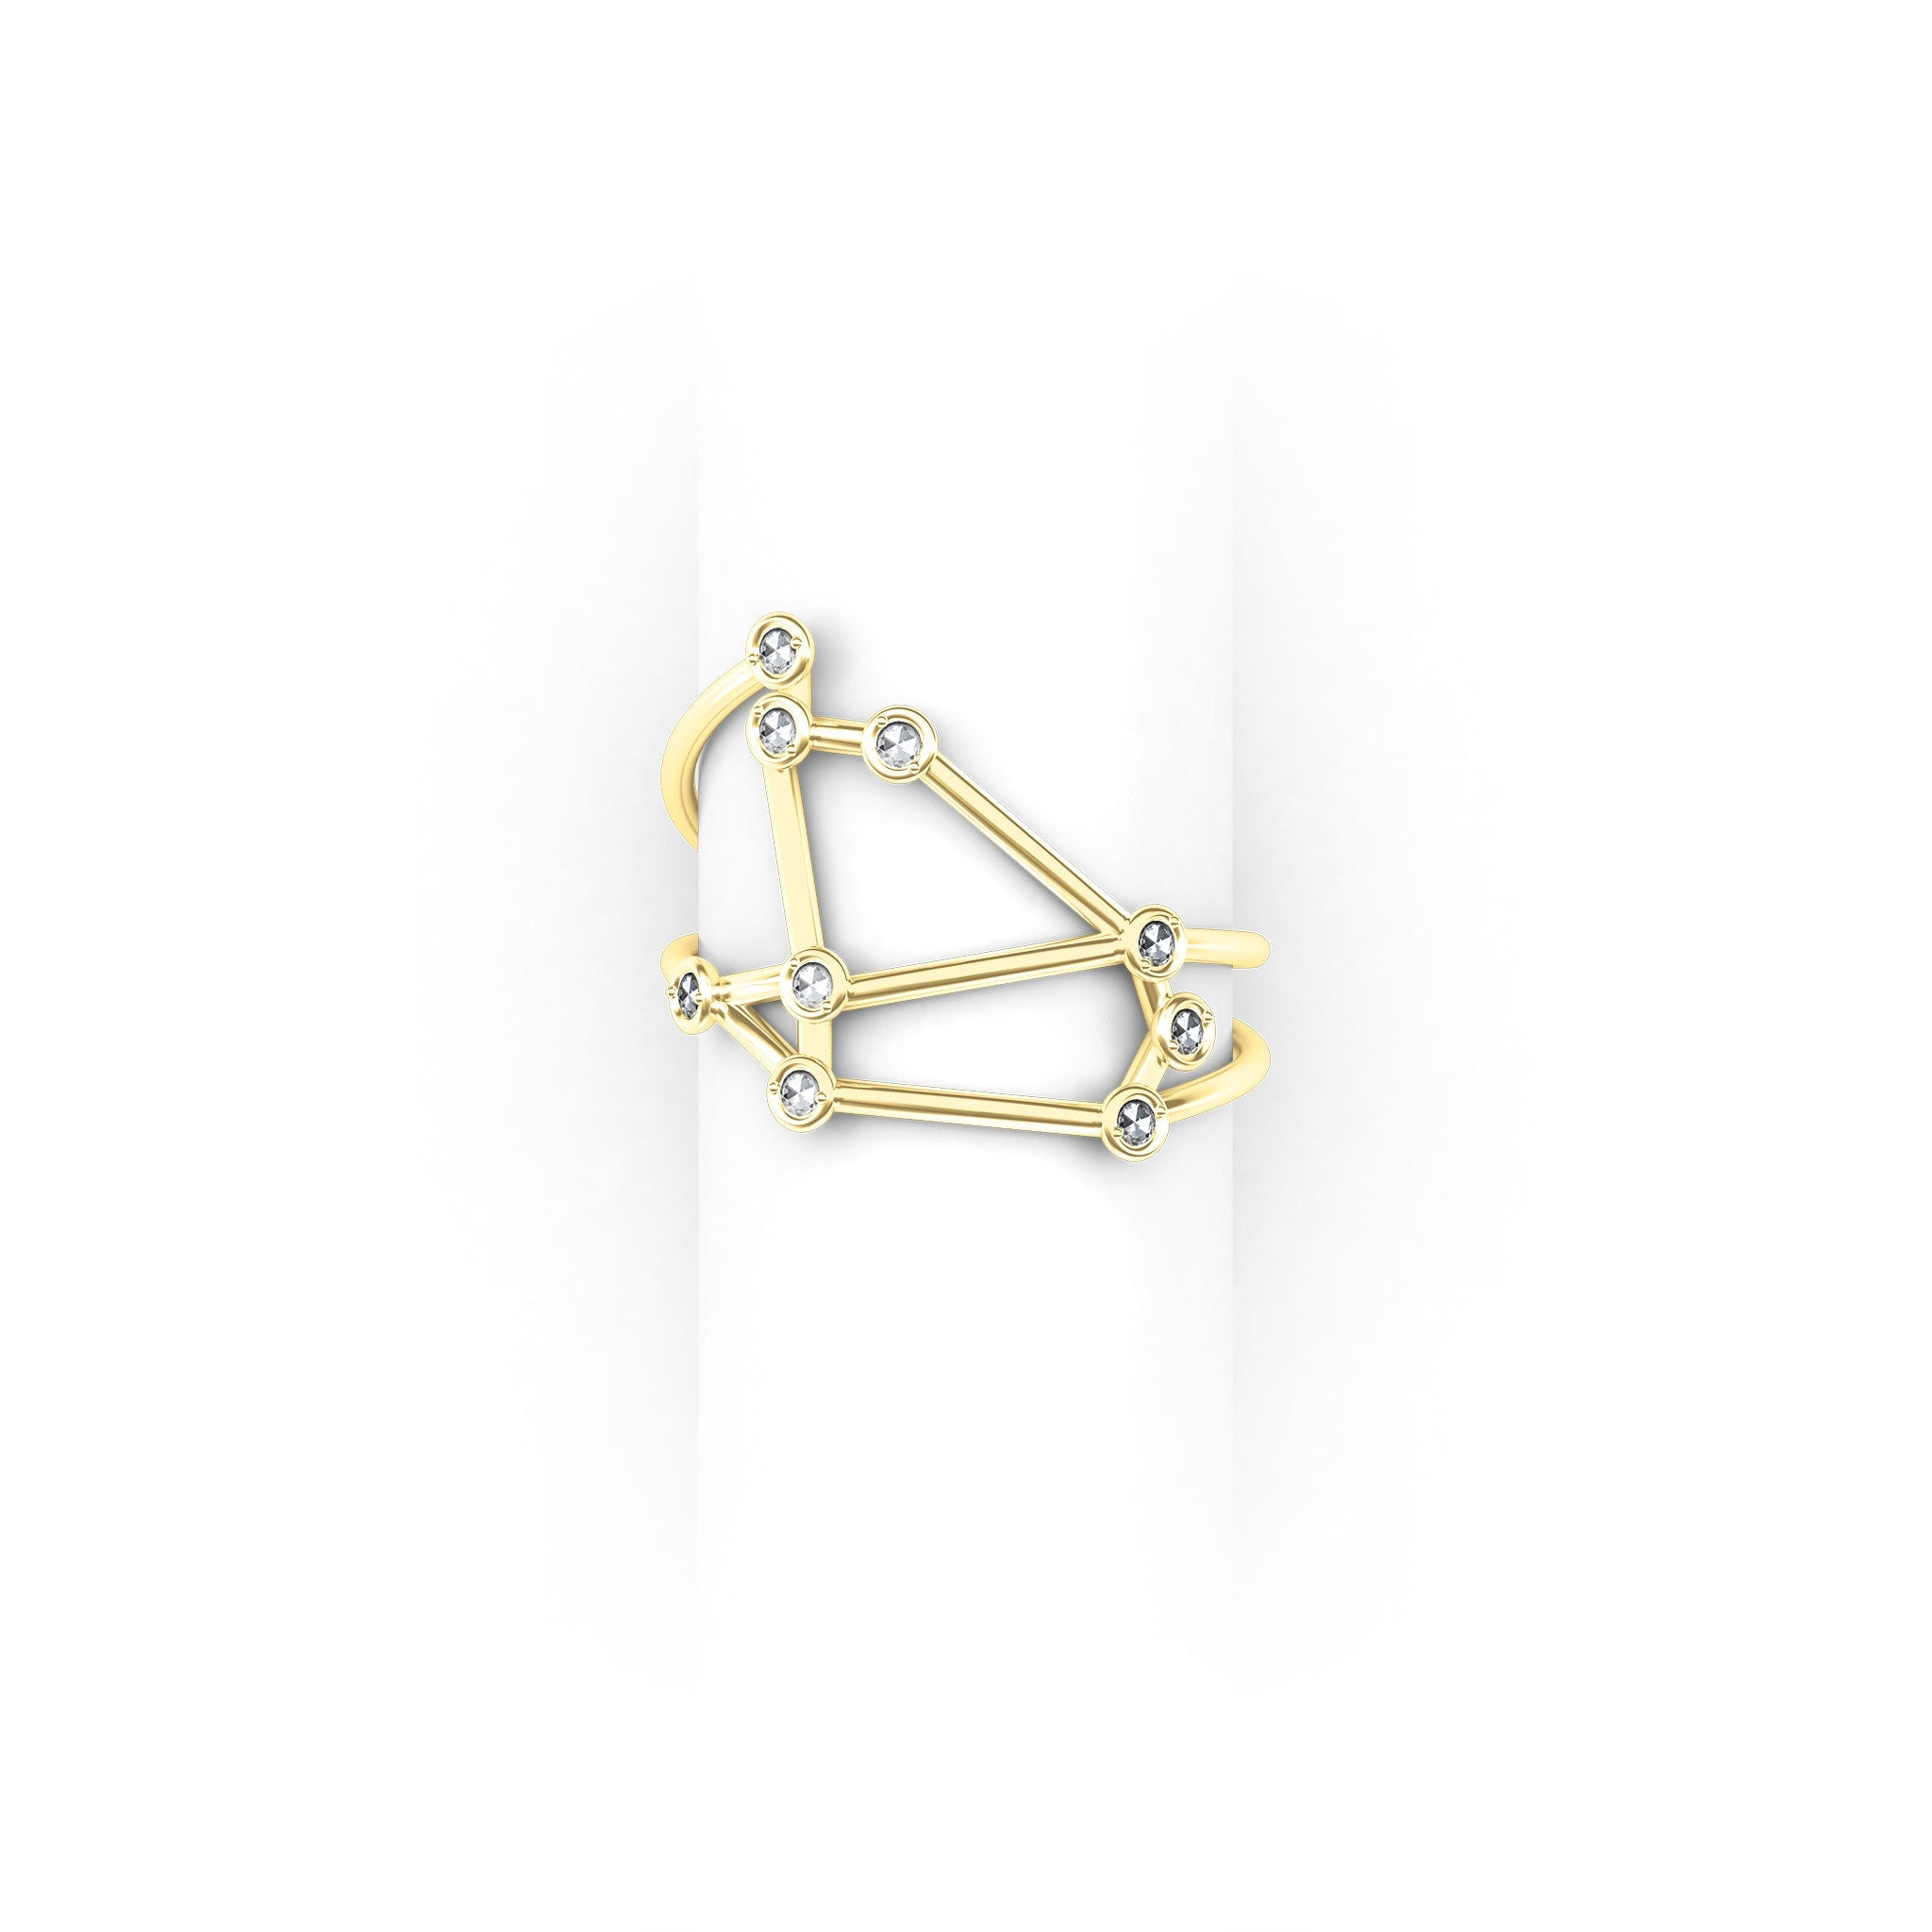 IN STOCK 18ct Yellow Gold Aries Constellation Ring